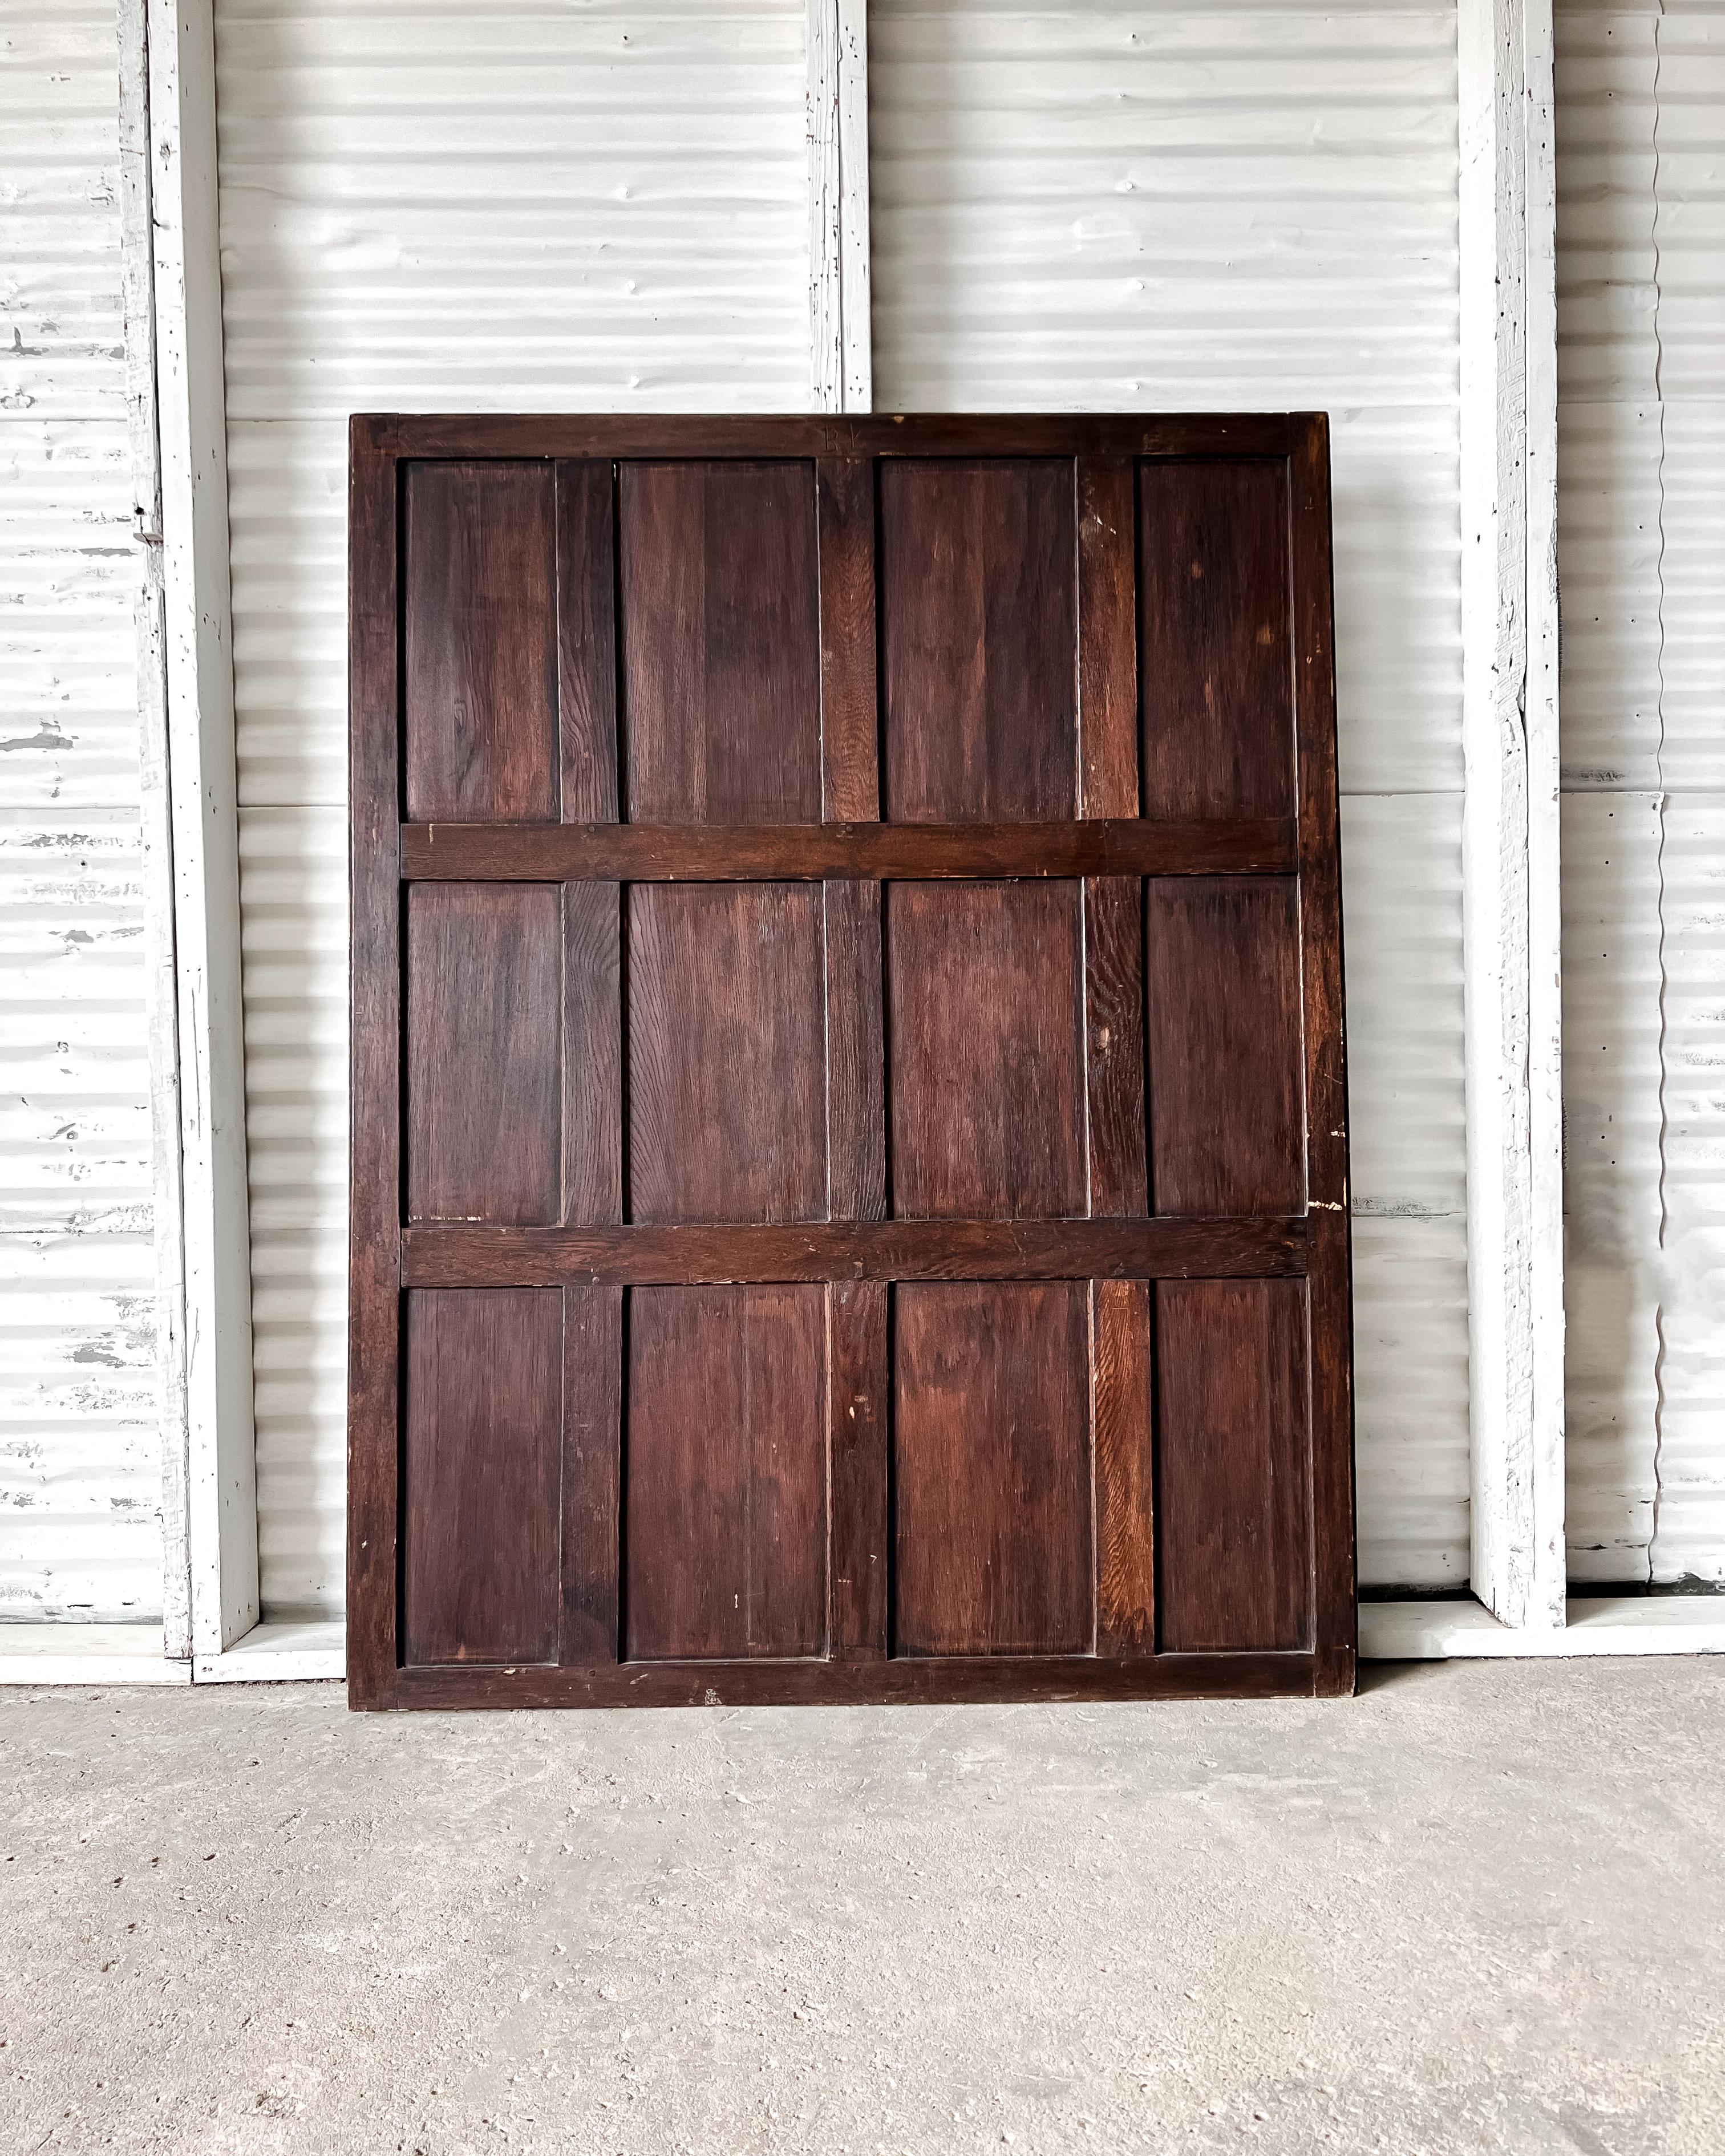 Salvaged in England, this reclaimed Victorian English oak wall panel, having 12 panels, bears the original medium to dark stained finish. Originally attached to a wall among a series of panels, this single panel is now a decorative architectural